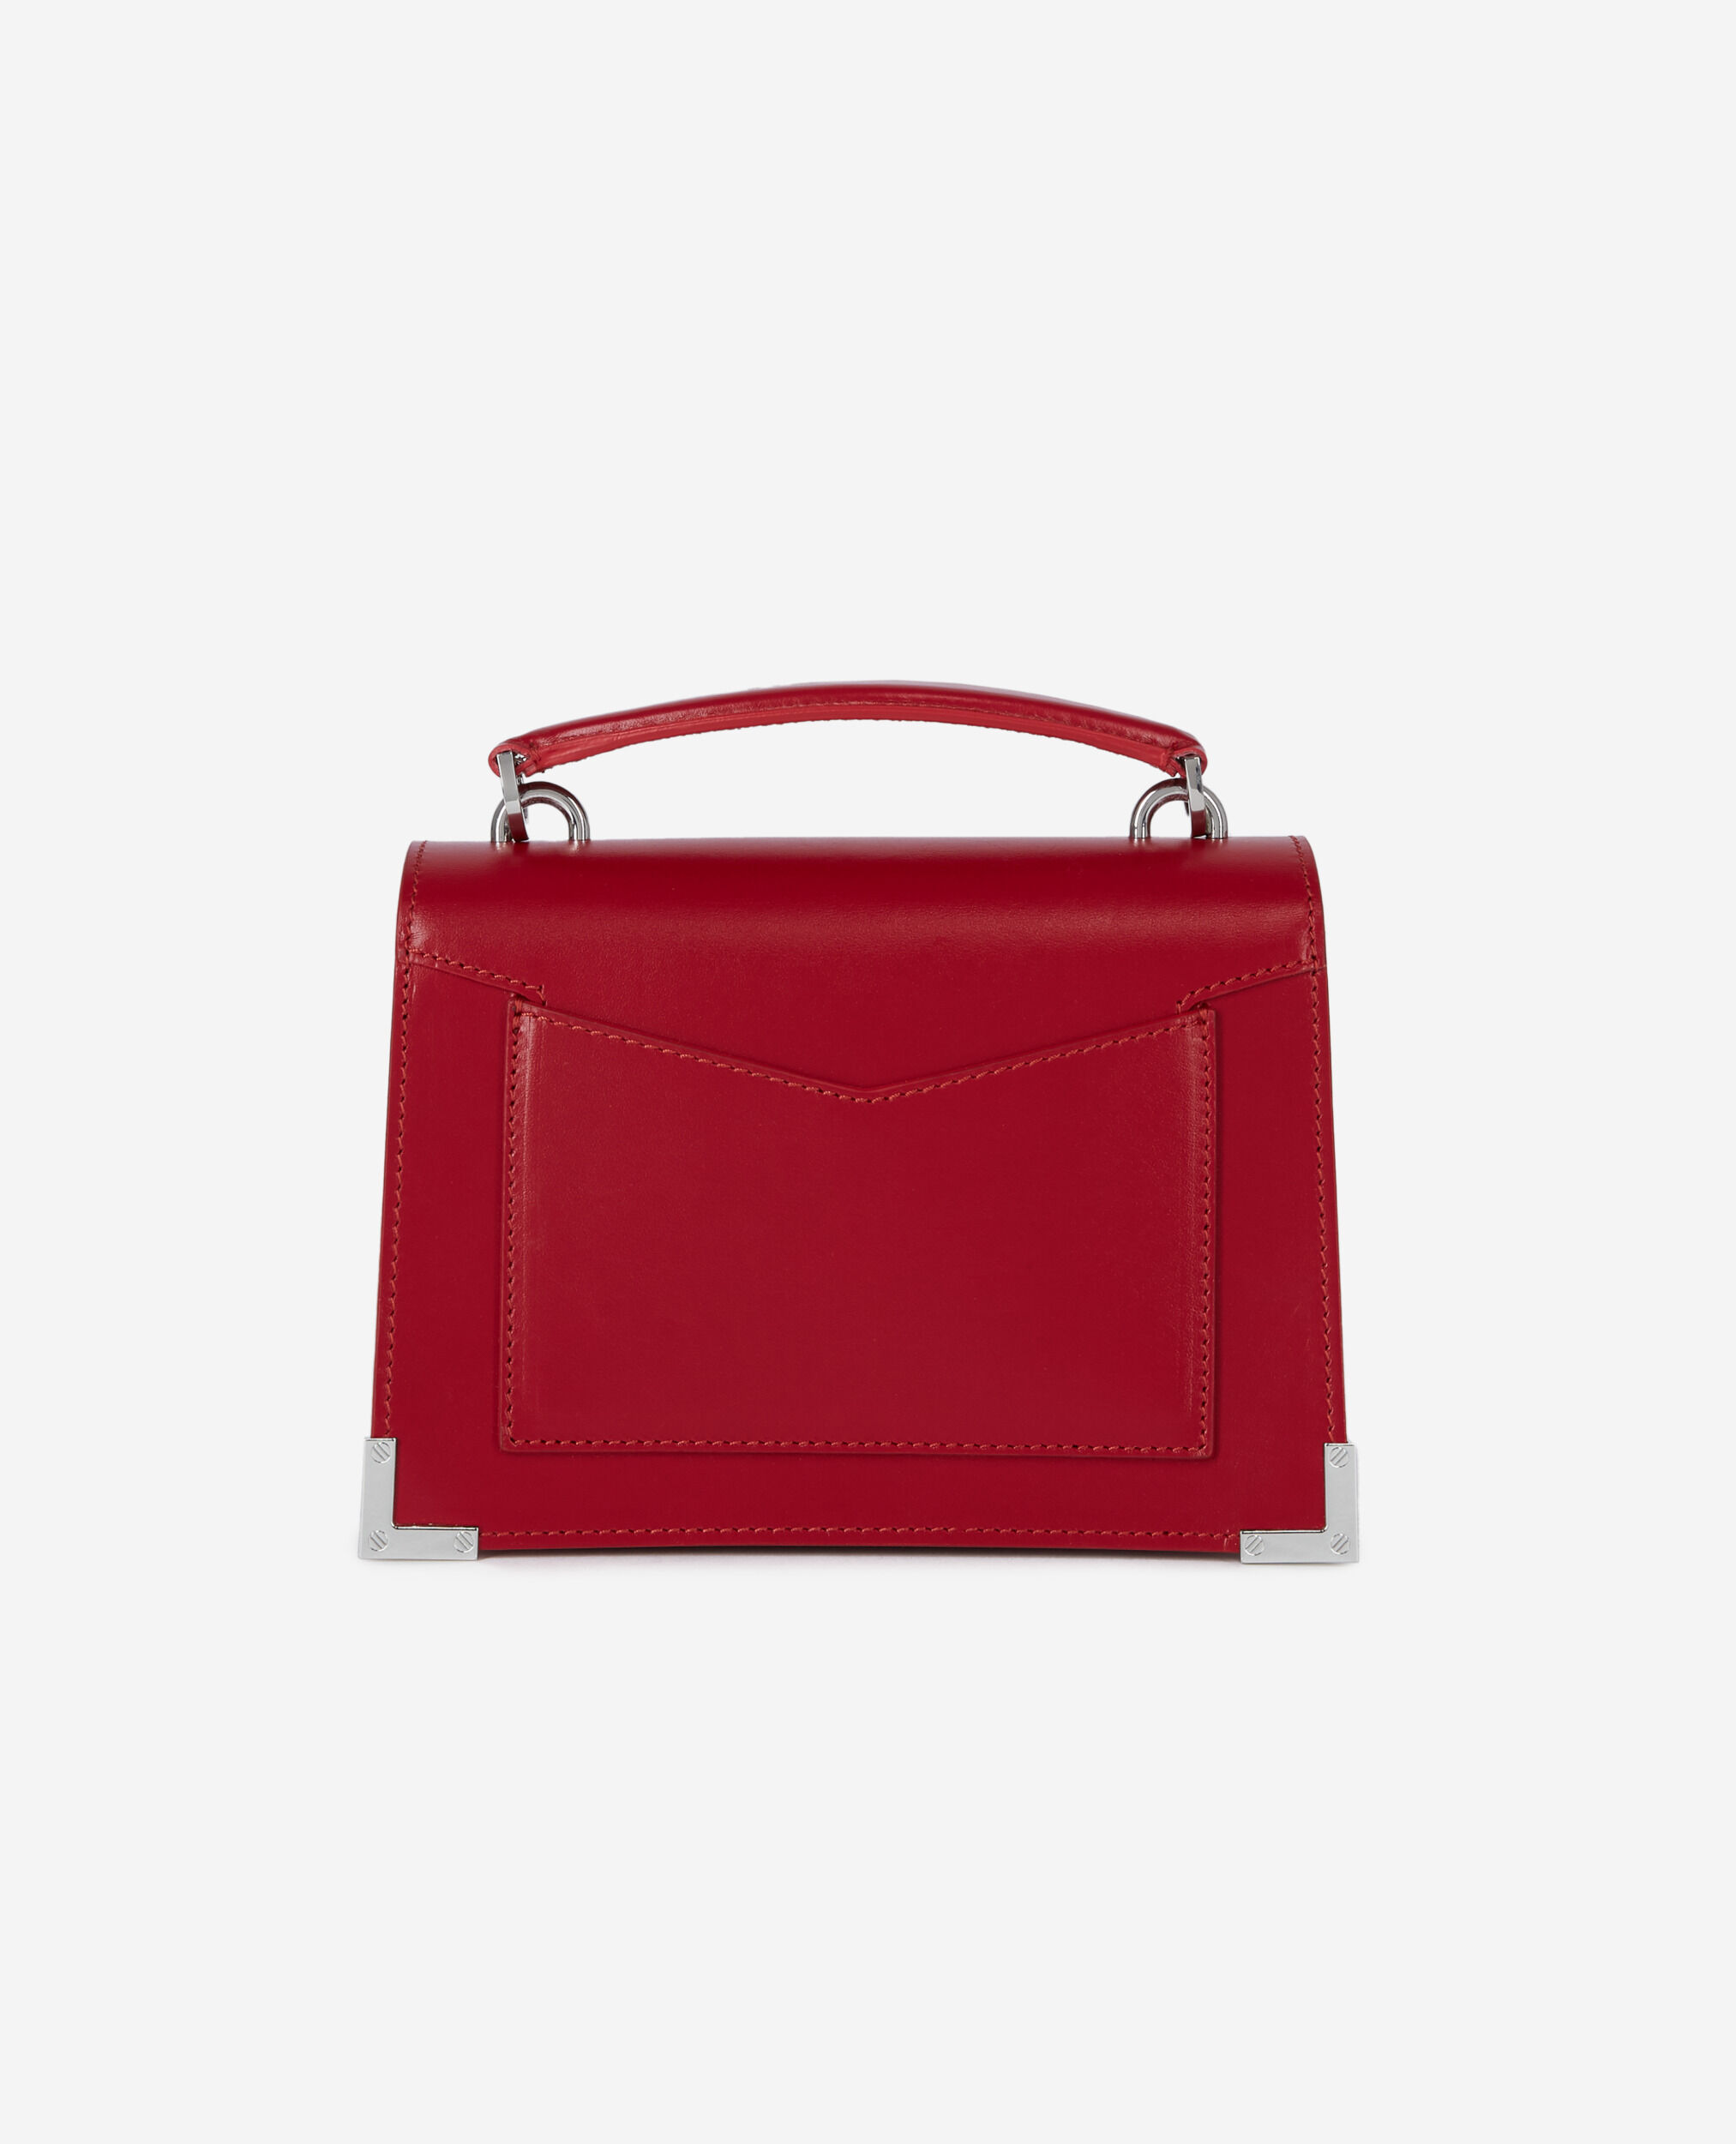 Small red Emily bag, ROUGE ALLURE, hi-res image number null